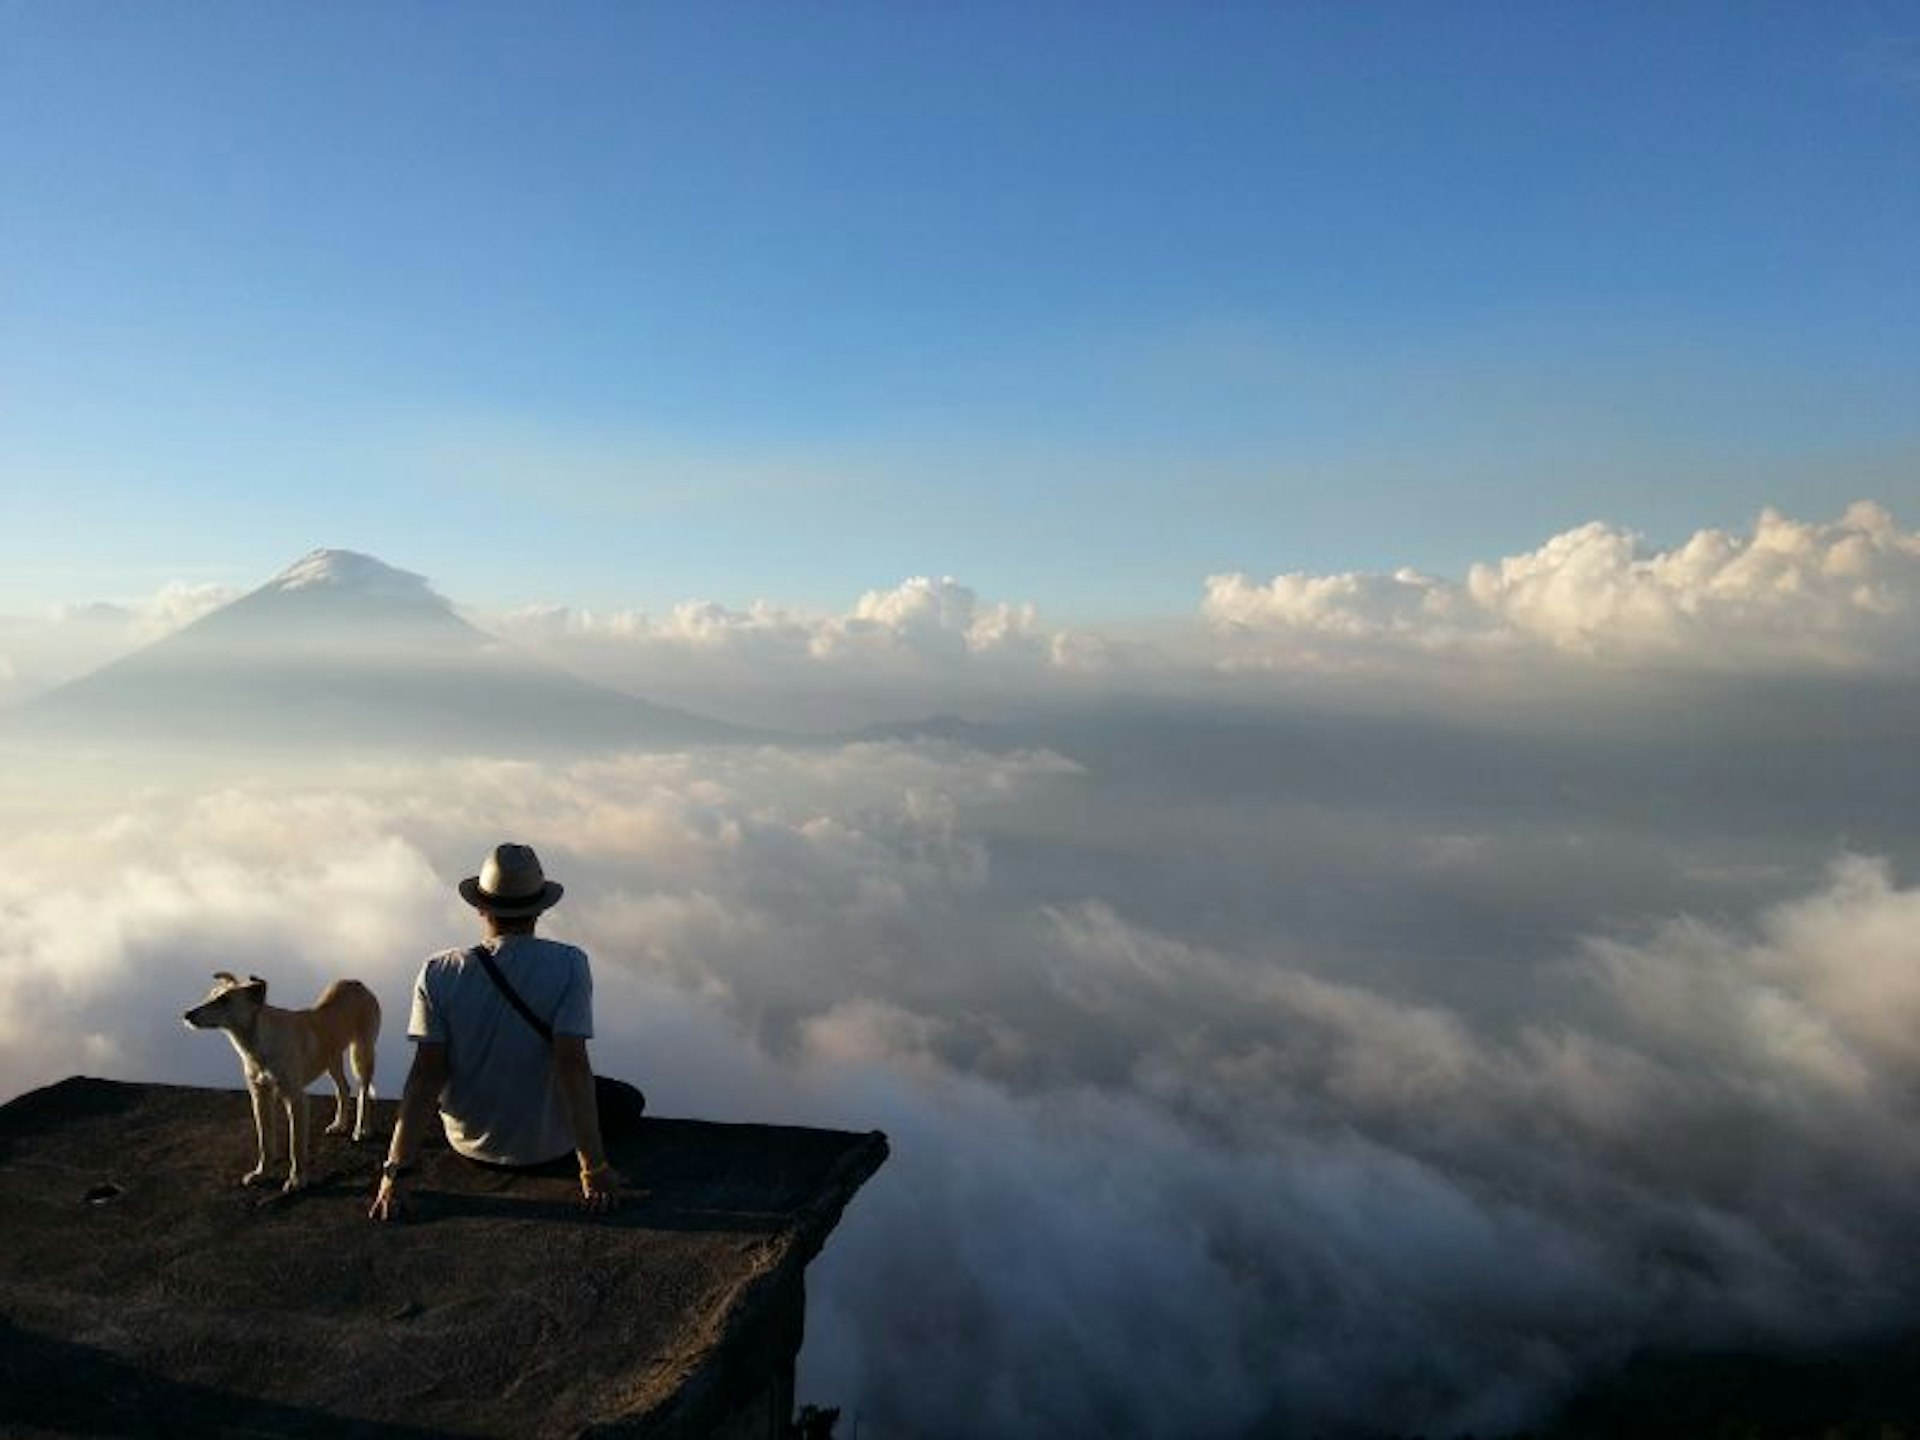 View from the Observatory Bunker at Volcano Pacaya, Guatemala